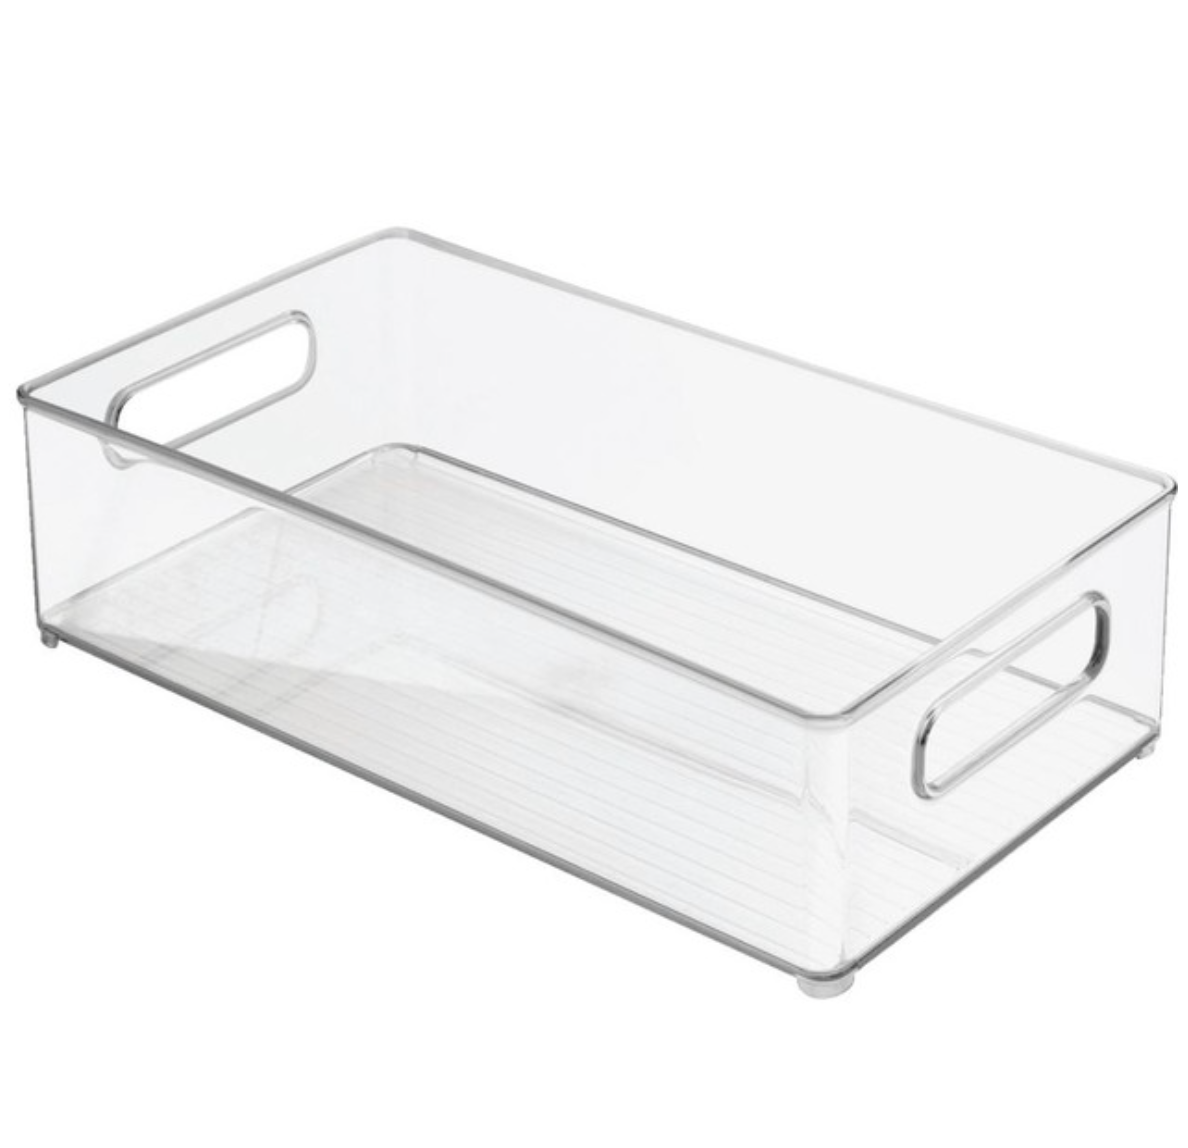 10L Clear Plastic Storage Box with Removable Dividers Containers Bin Tubs  dd